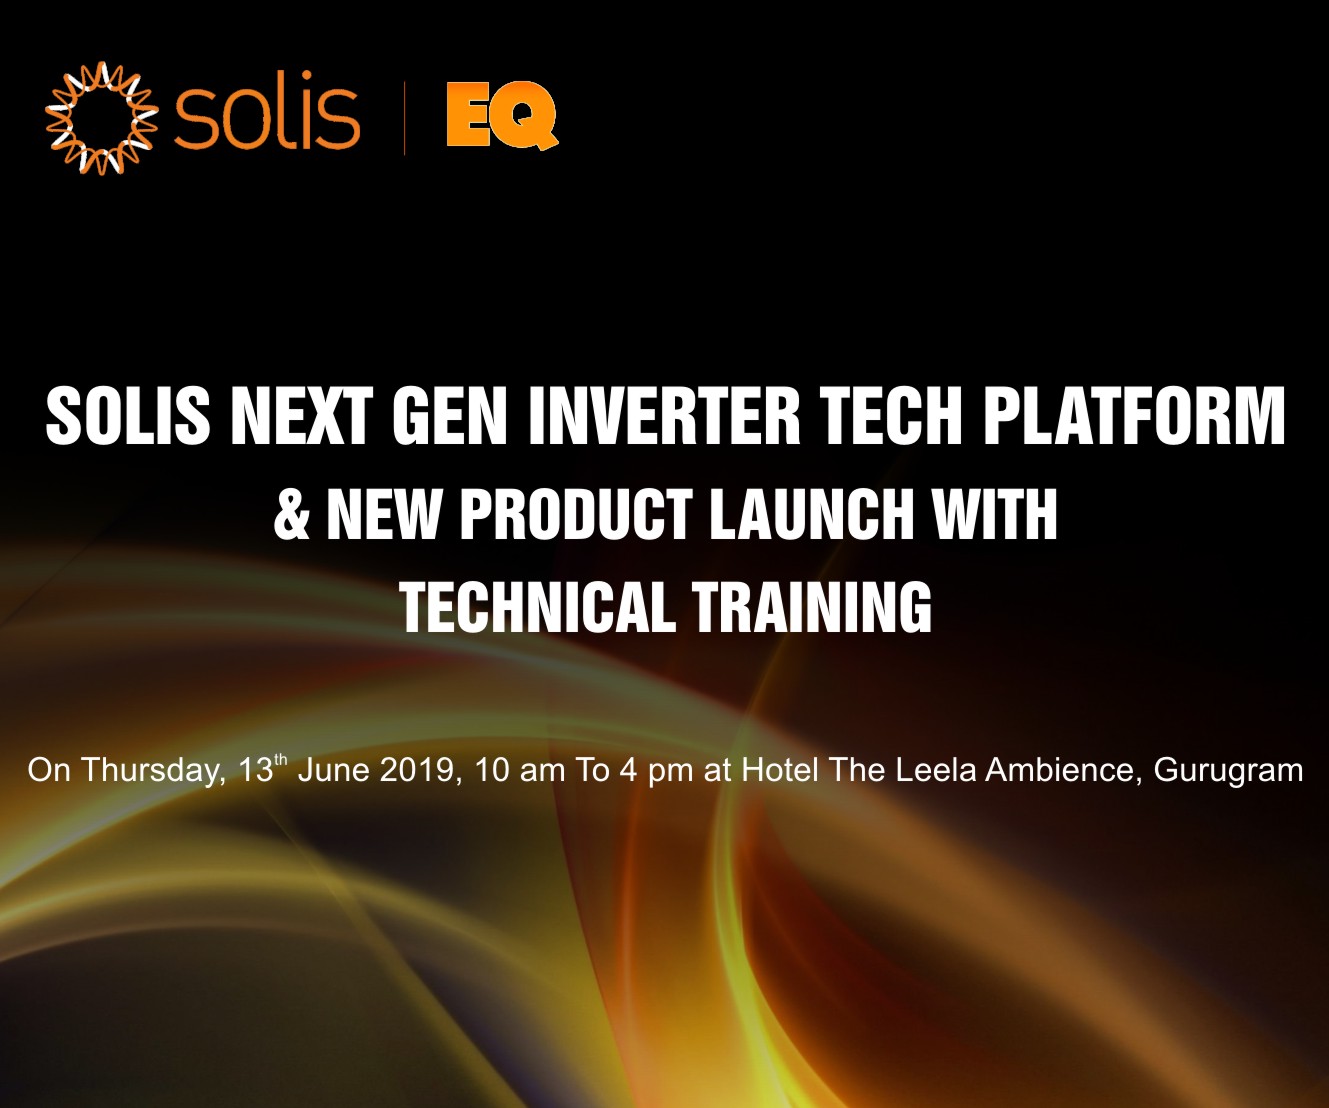 Solis Next Gen Inverter Tech Platform & New Product Launch with Technical Training on June 13th, 2019 at Hotel The Leela Ambience, Gurugram